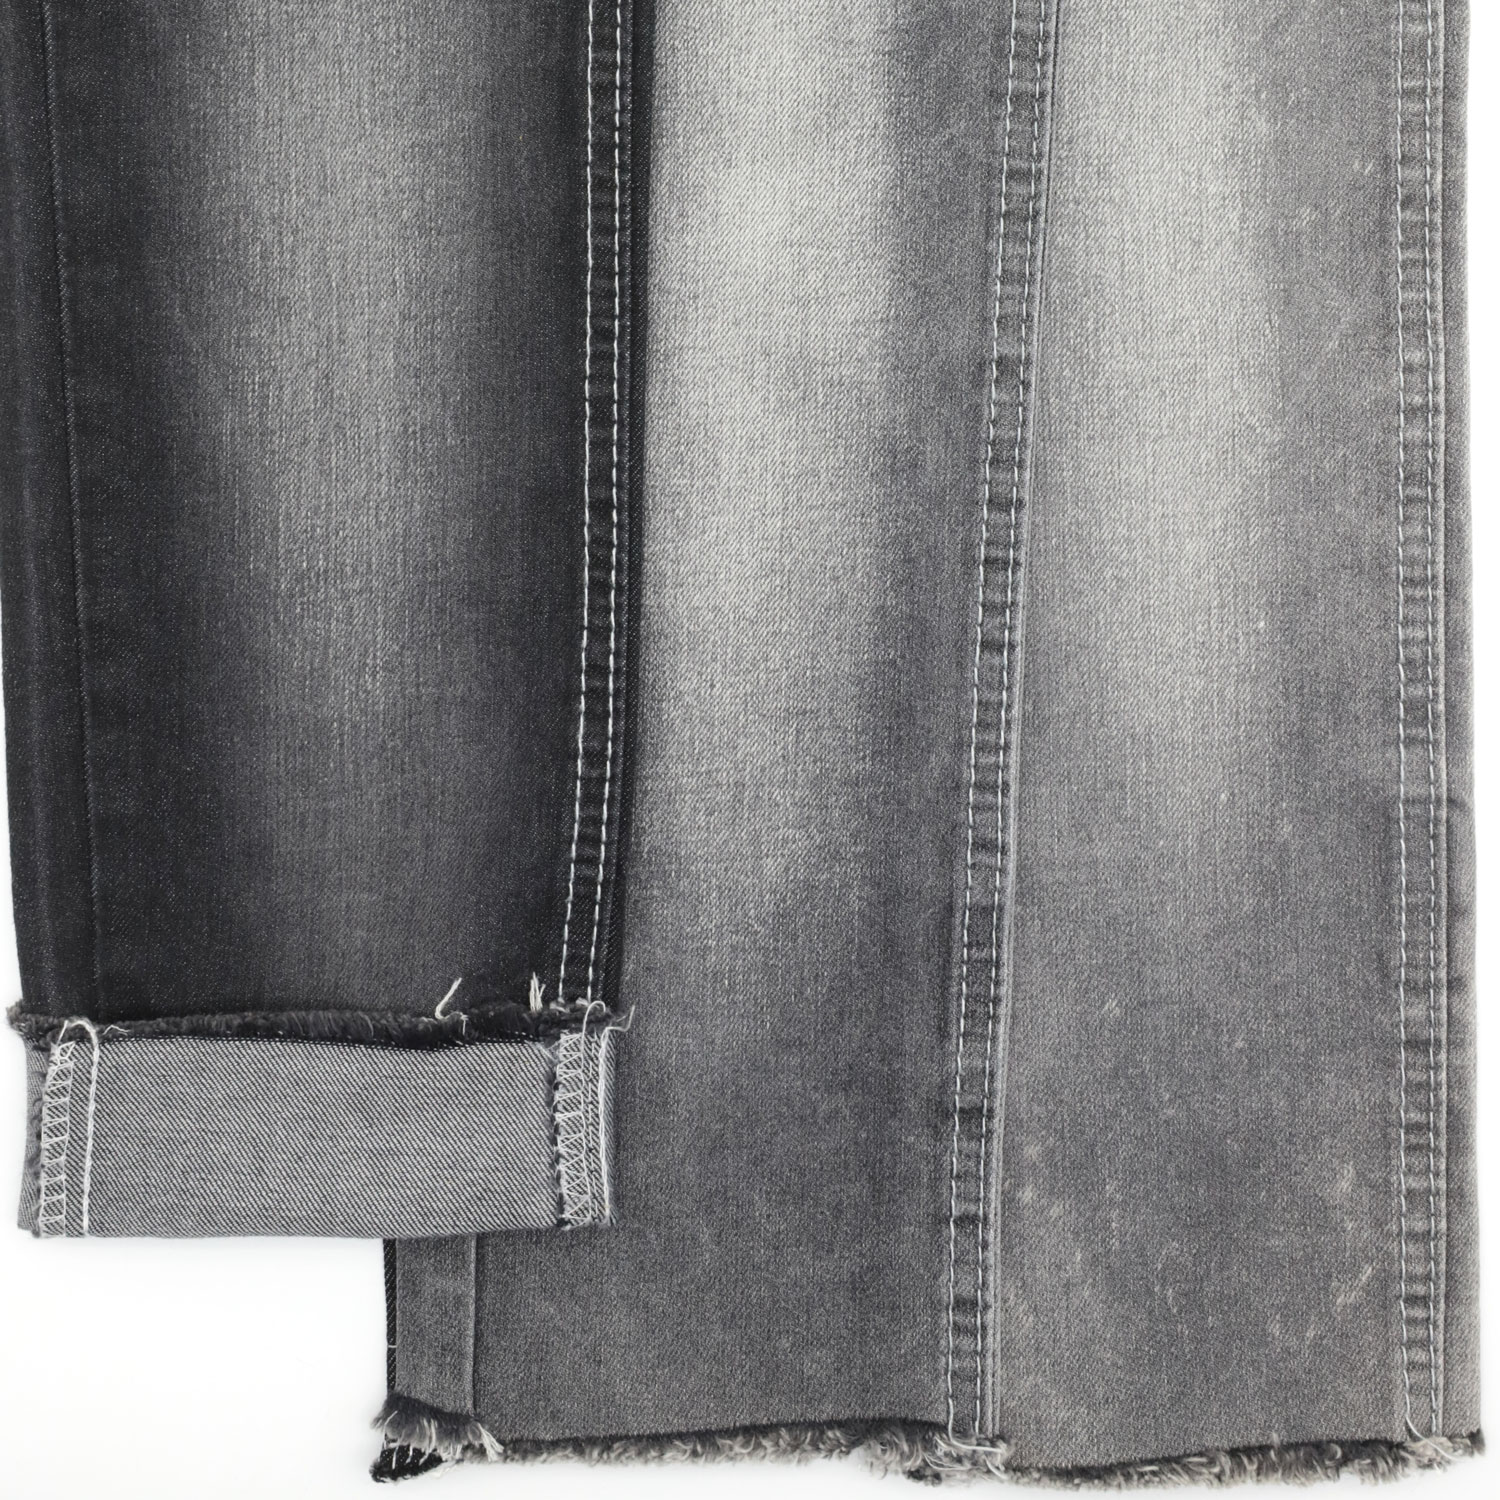 Important Things to Consider Before Buying a Non-stretch Denim Fabric 2